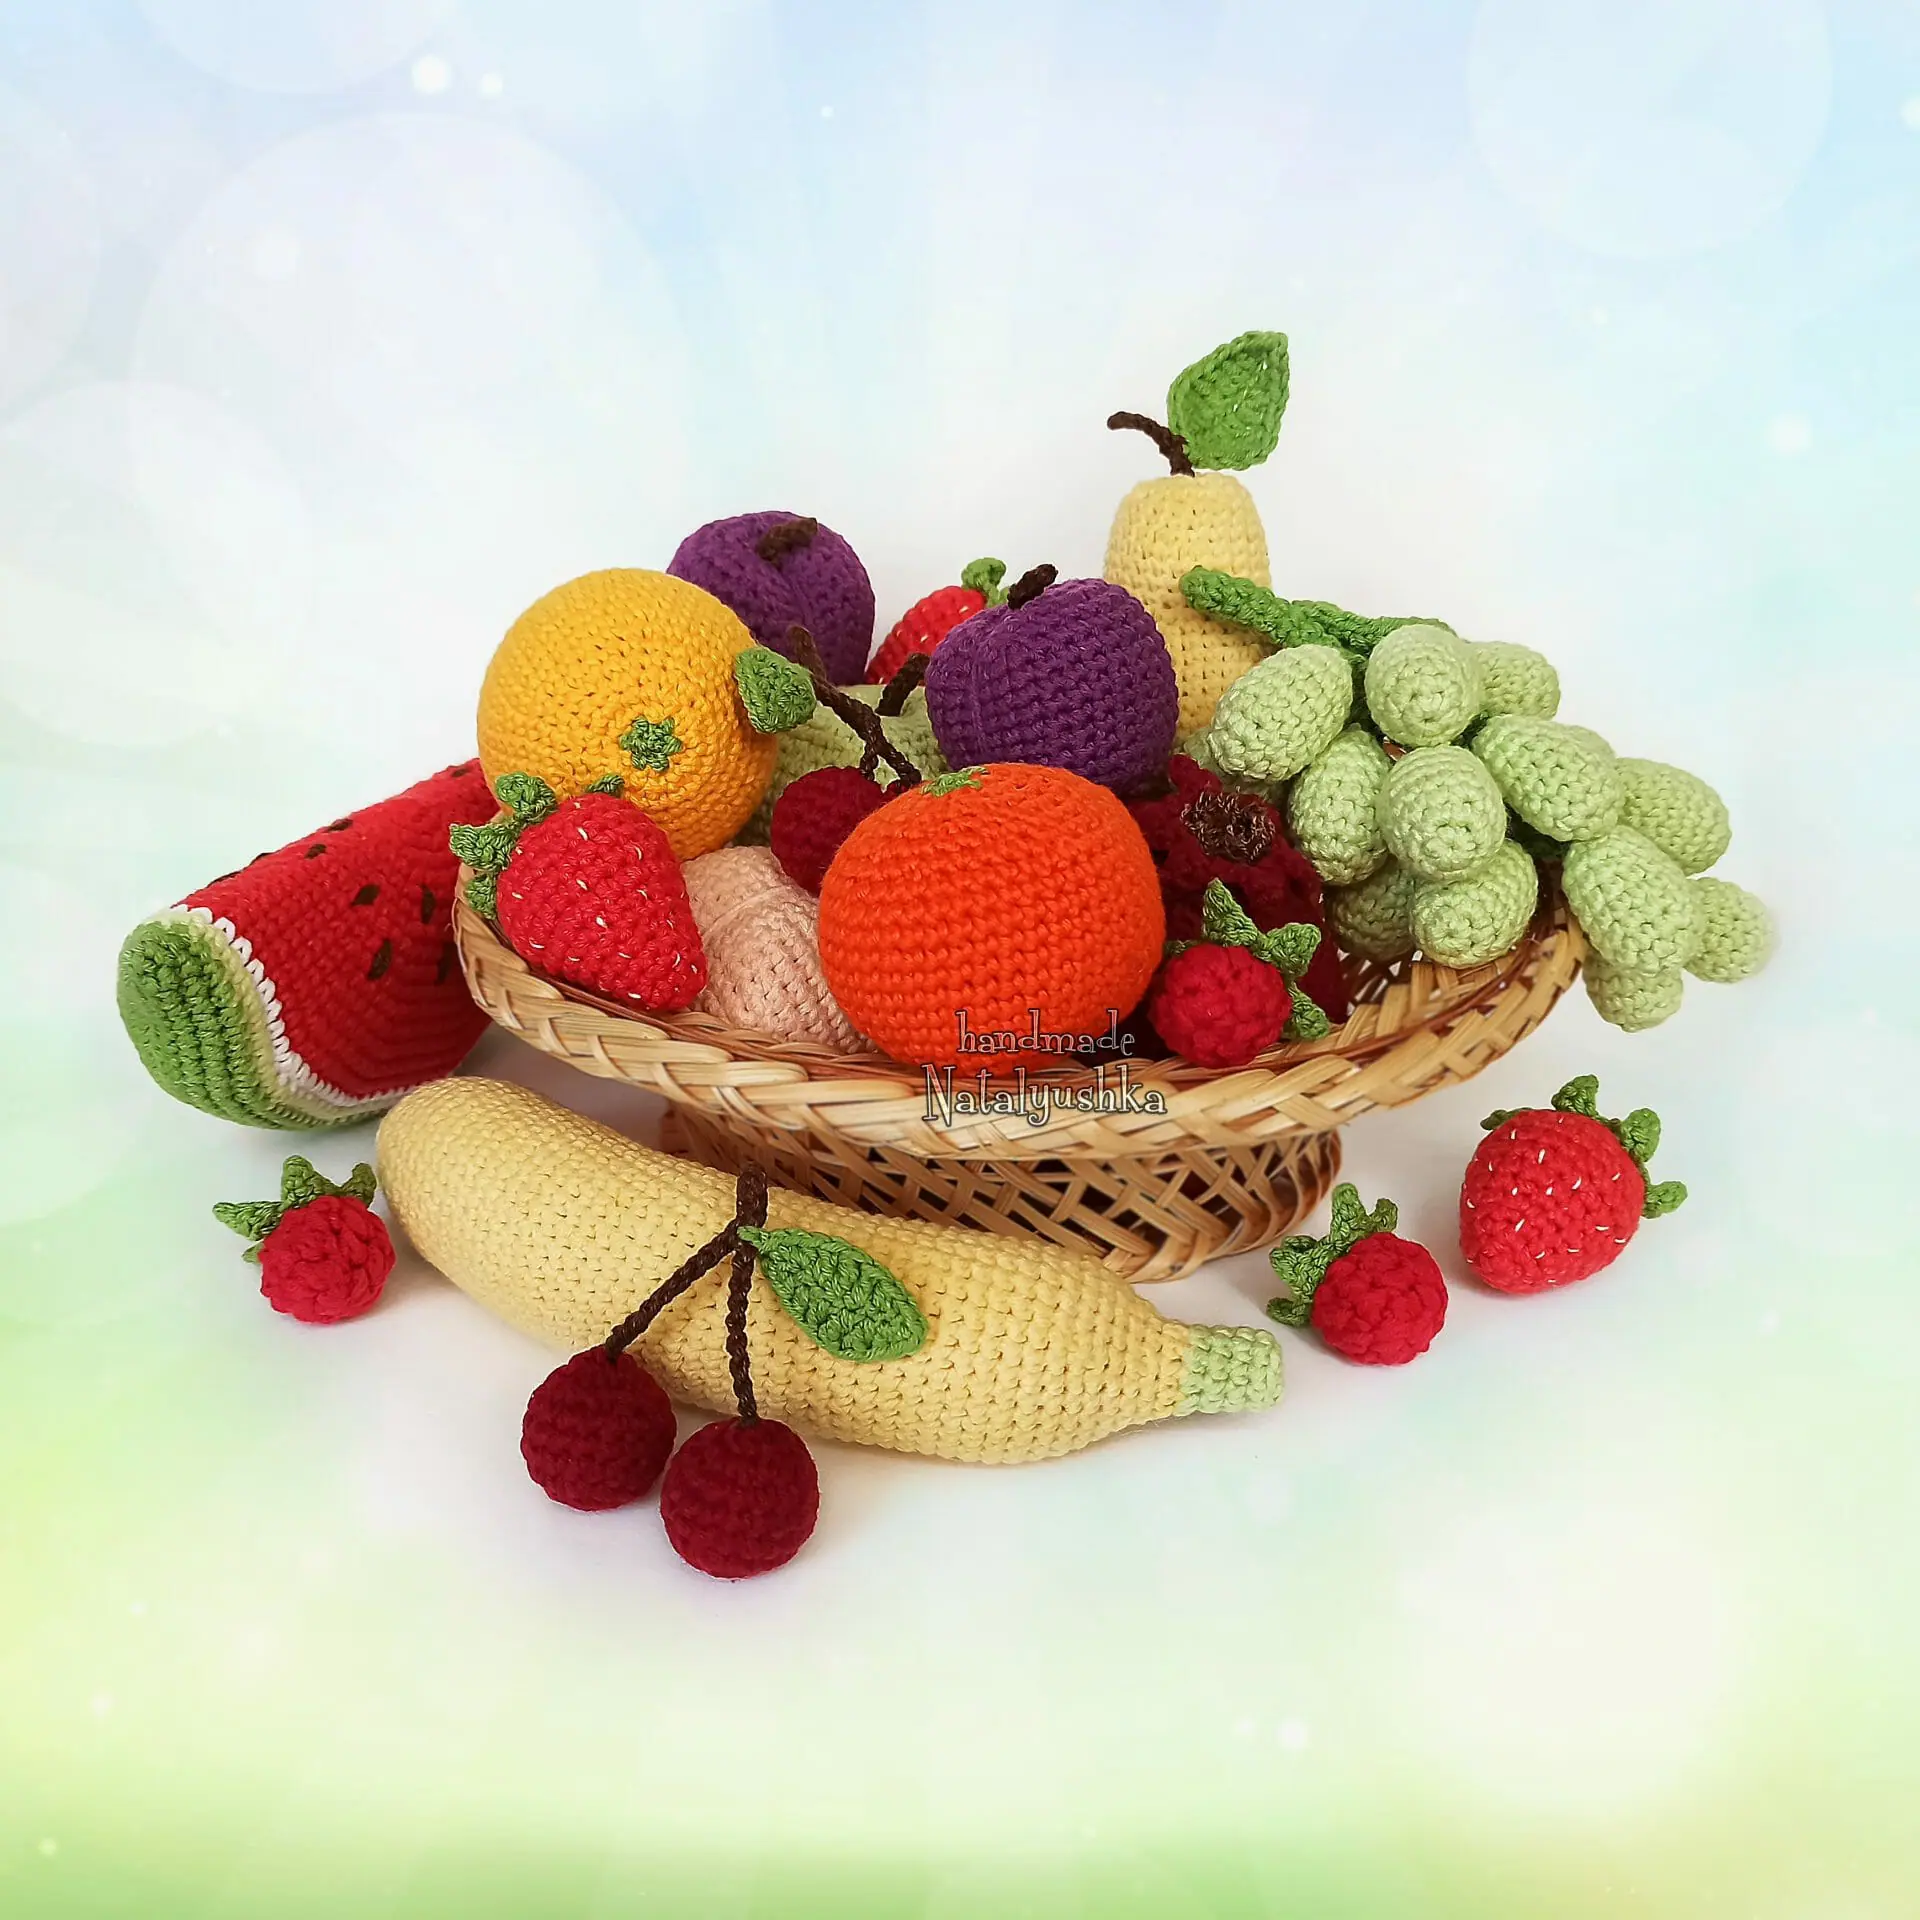 Fruits & Berries toys